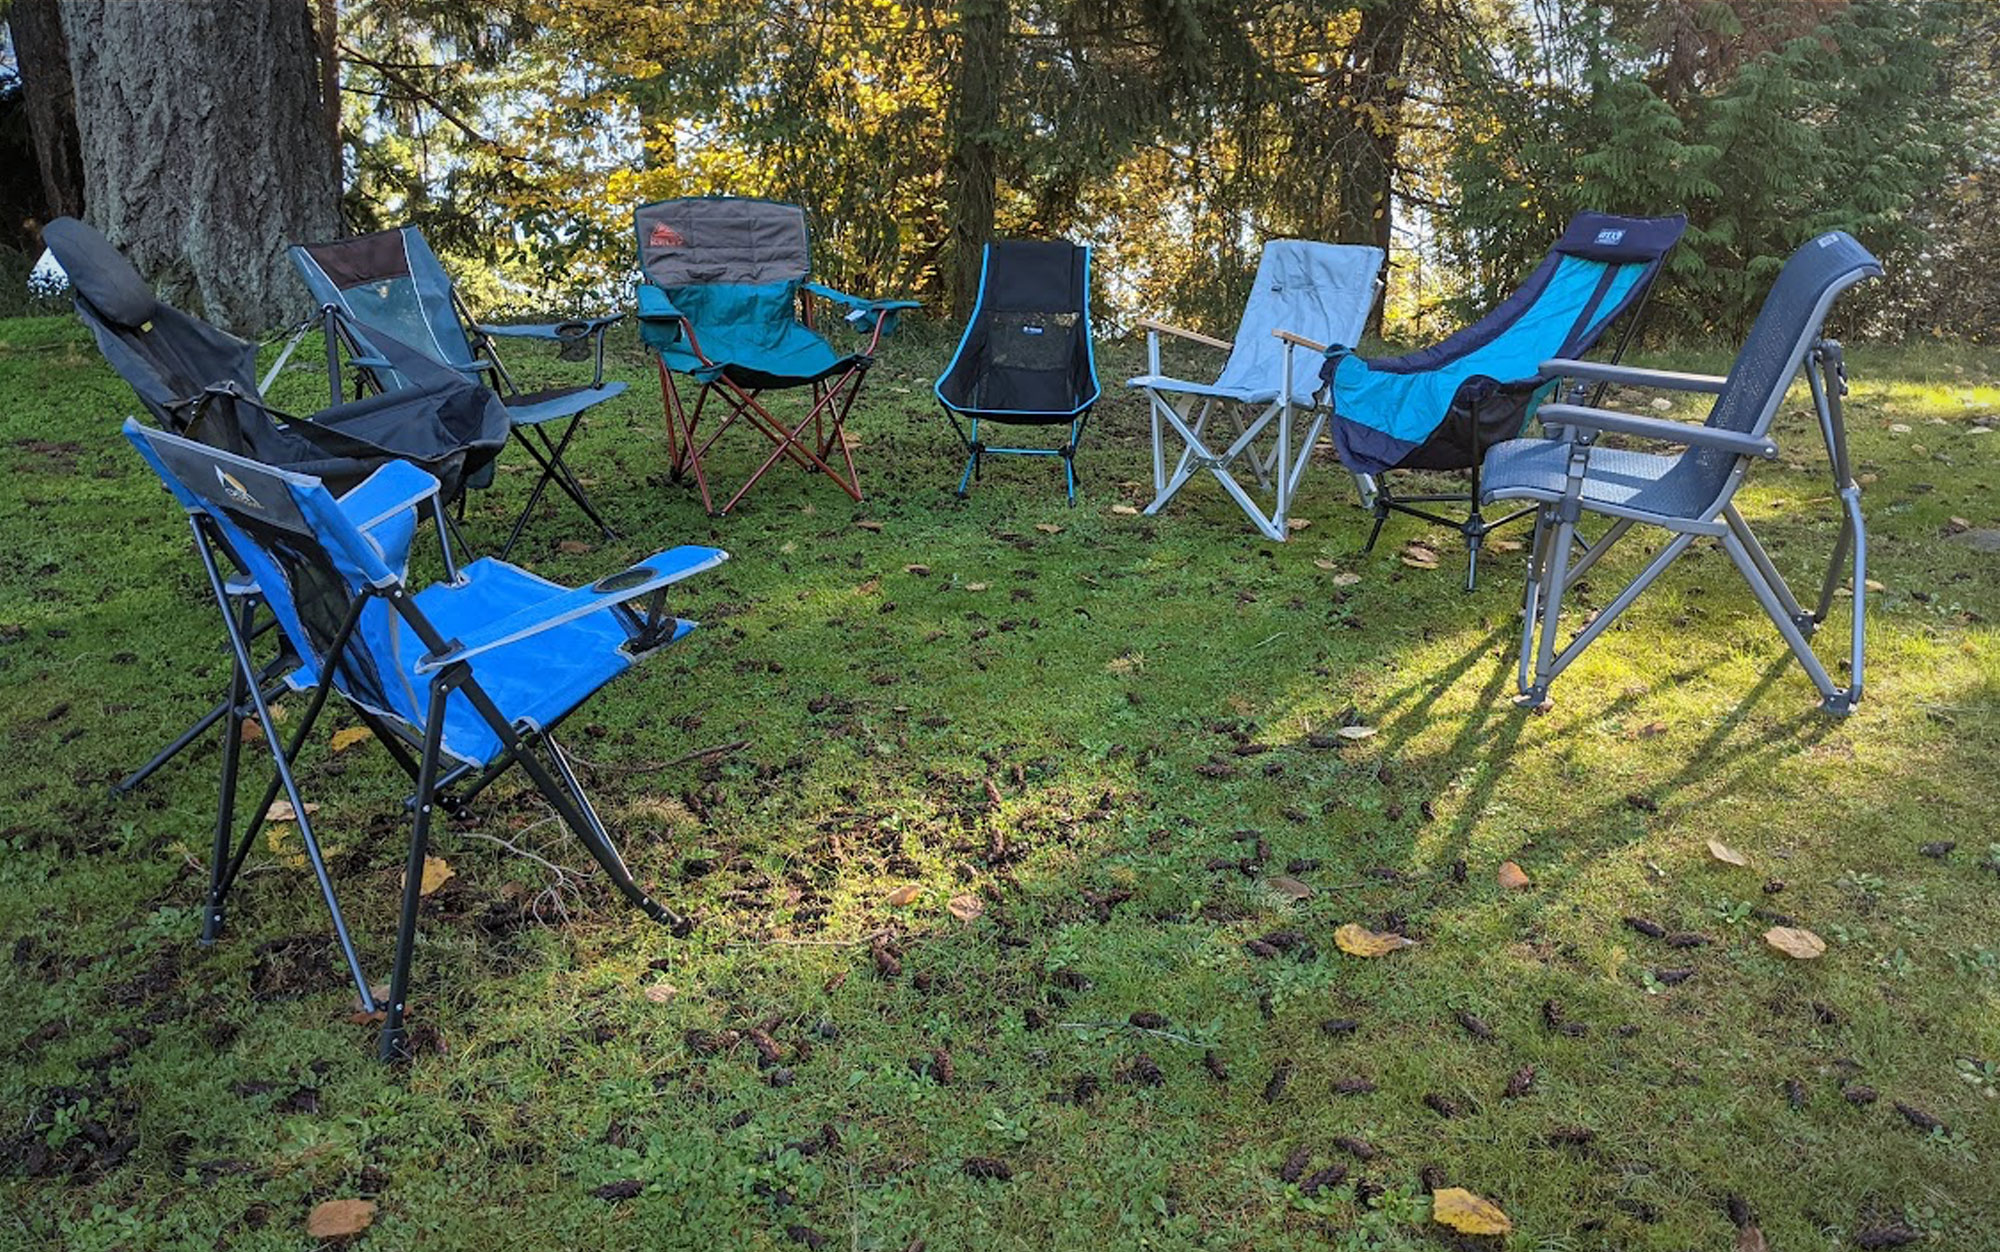 Best Ultralight Camping Chairs 2023 - Lightweight Camp Chairs